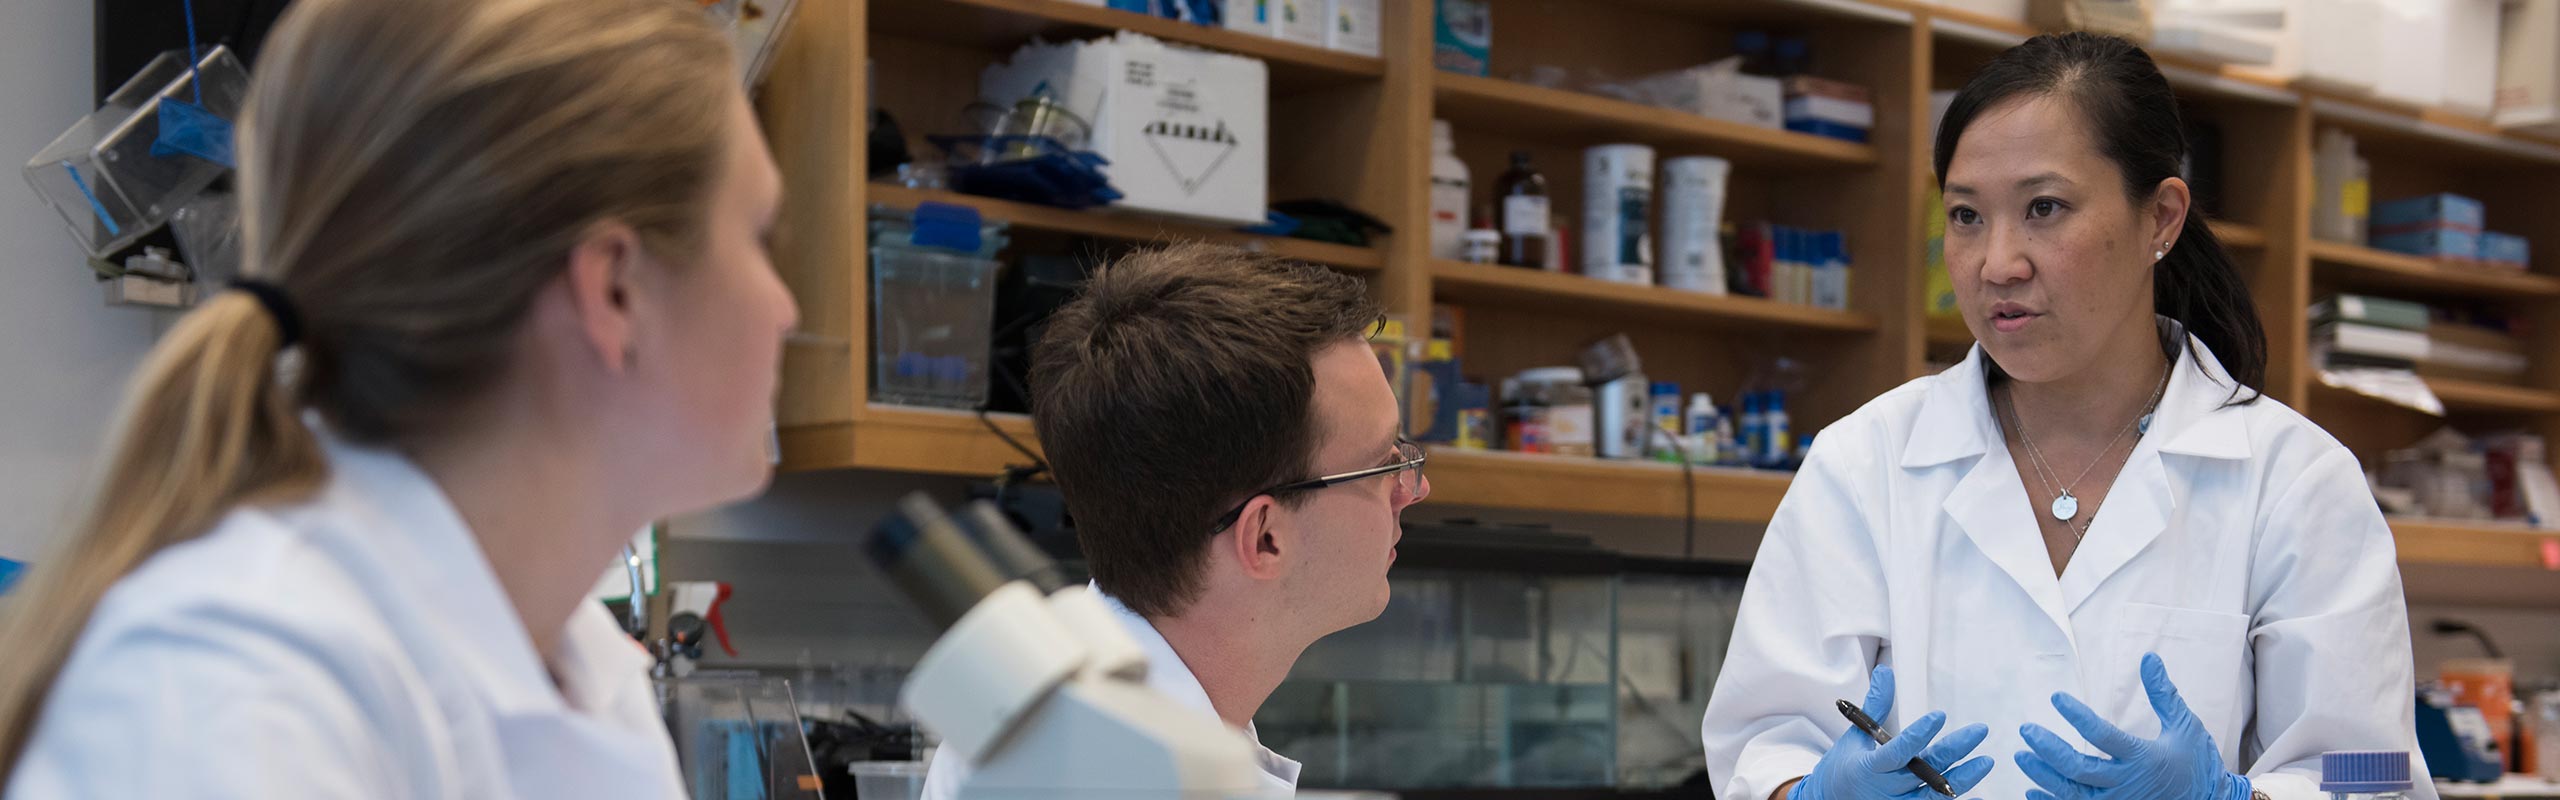 Associate Professor of Biology Jen Uno works with Lumen Scholar and biochemistry major Alex Ball '18 and Honors Fellow and biology major Emily Bell '18 in a laboratory.